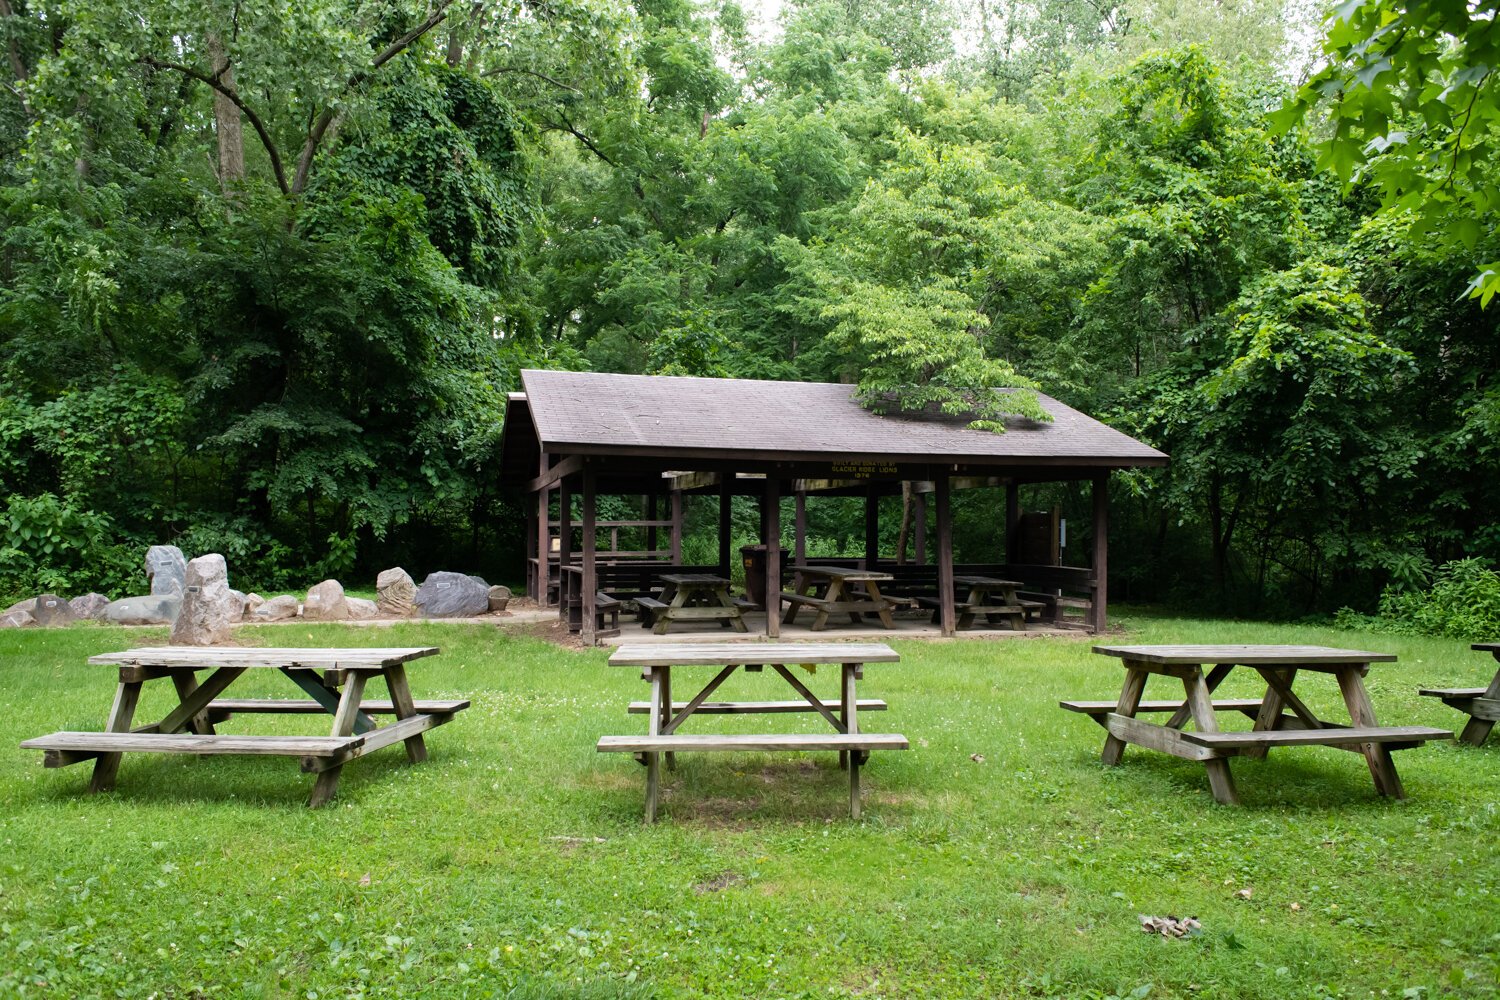 Fox Island Park is located at 7324 Yohne Rd.